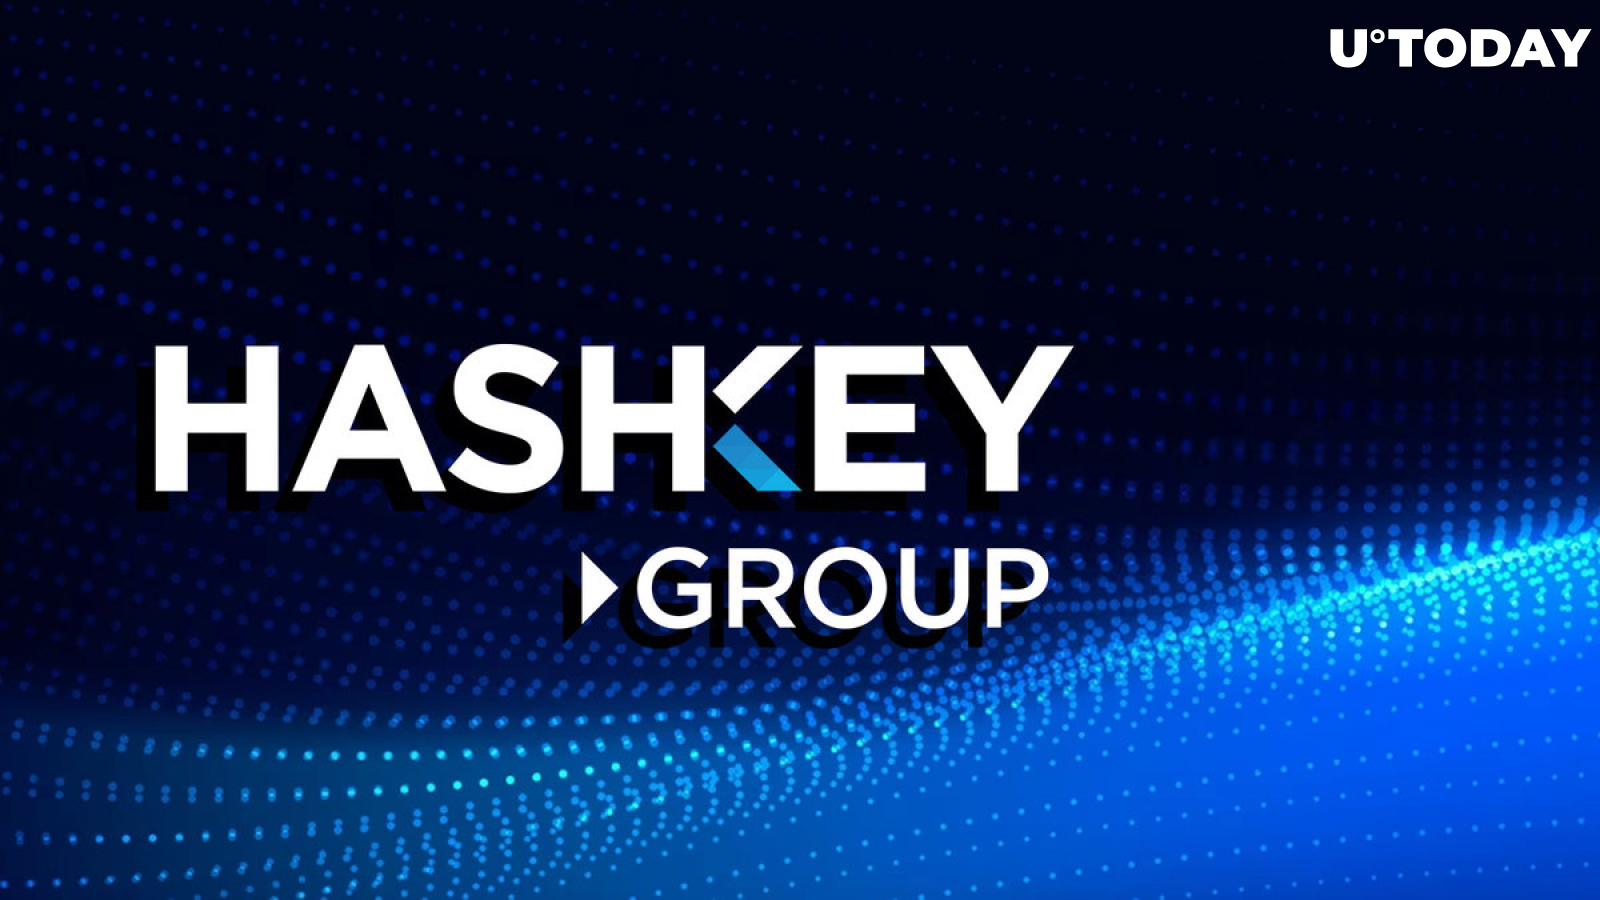 Asian Crypto Giant HashKey Group Now Licensed to Start OTC Trading in Hong Kong